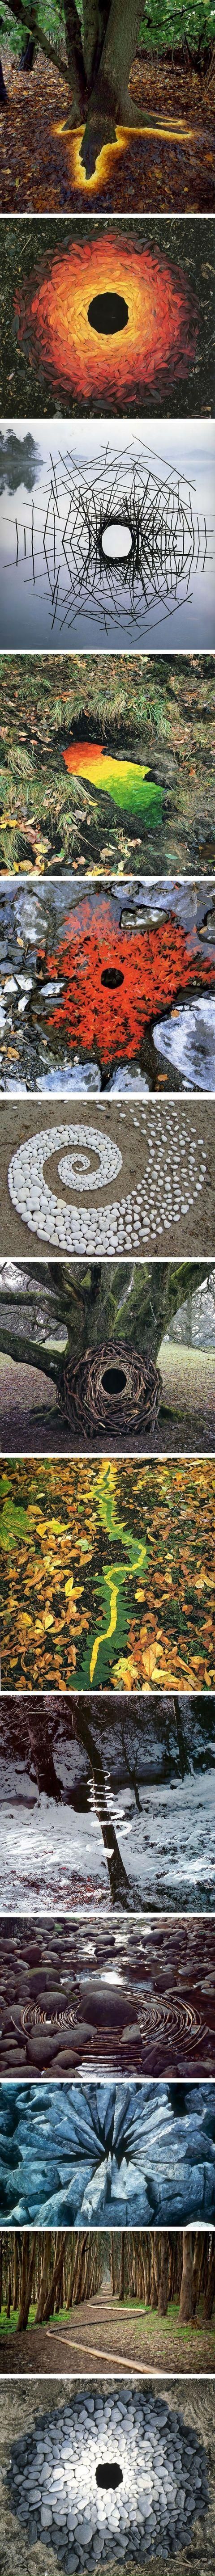 Very clever…I especially like the glowing tree roots, but I dont